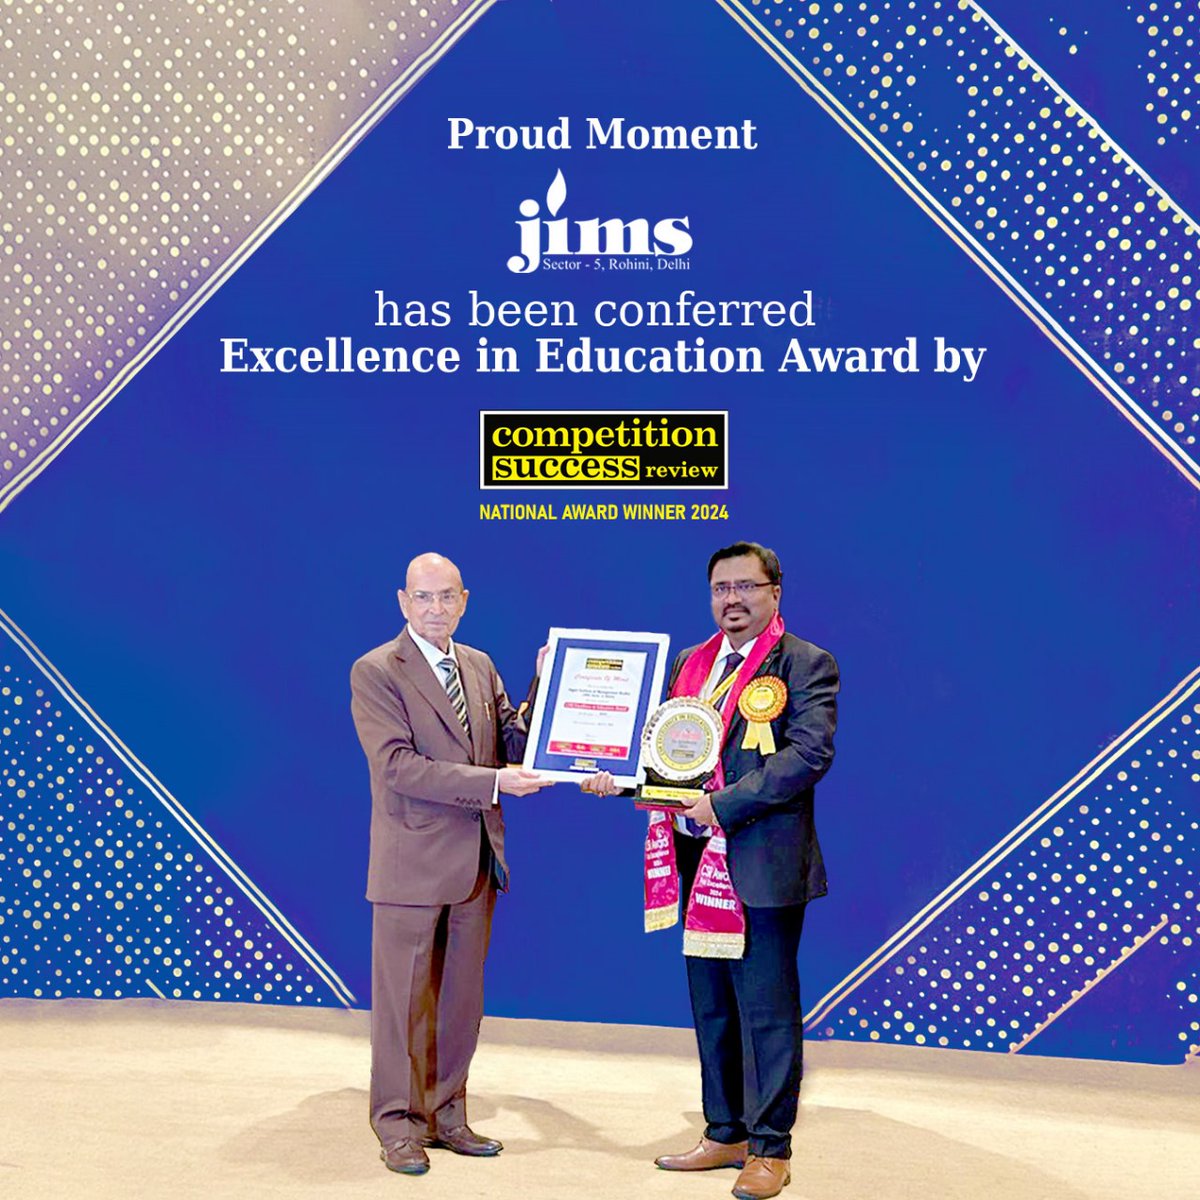 It's a proud moment for JIMS Rohini to be conferred the Excellence in Education Award by Competition Success Review.

#CSR #CSRaward #JIMSRohini #excellenceineducation